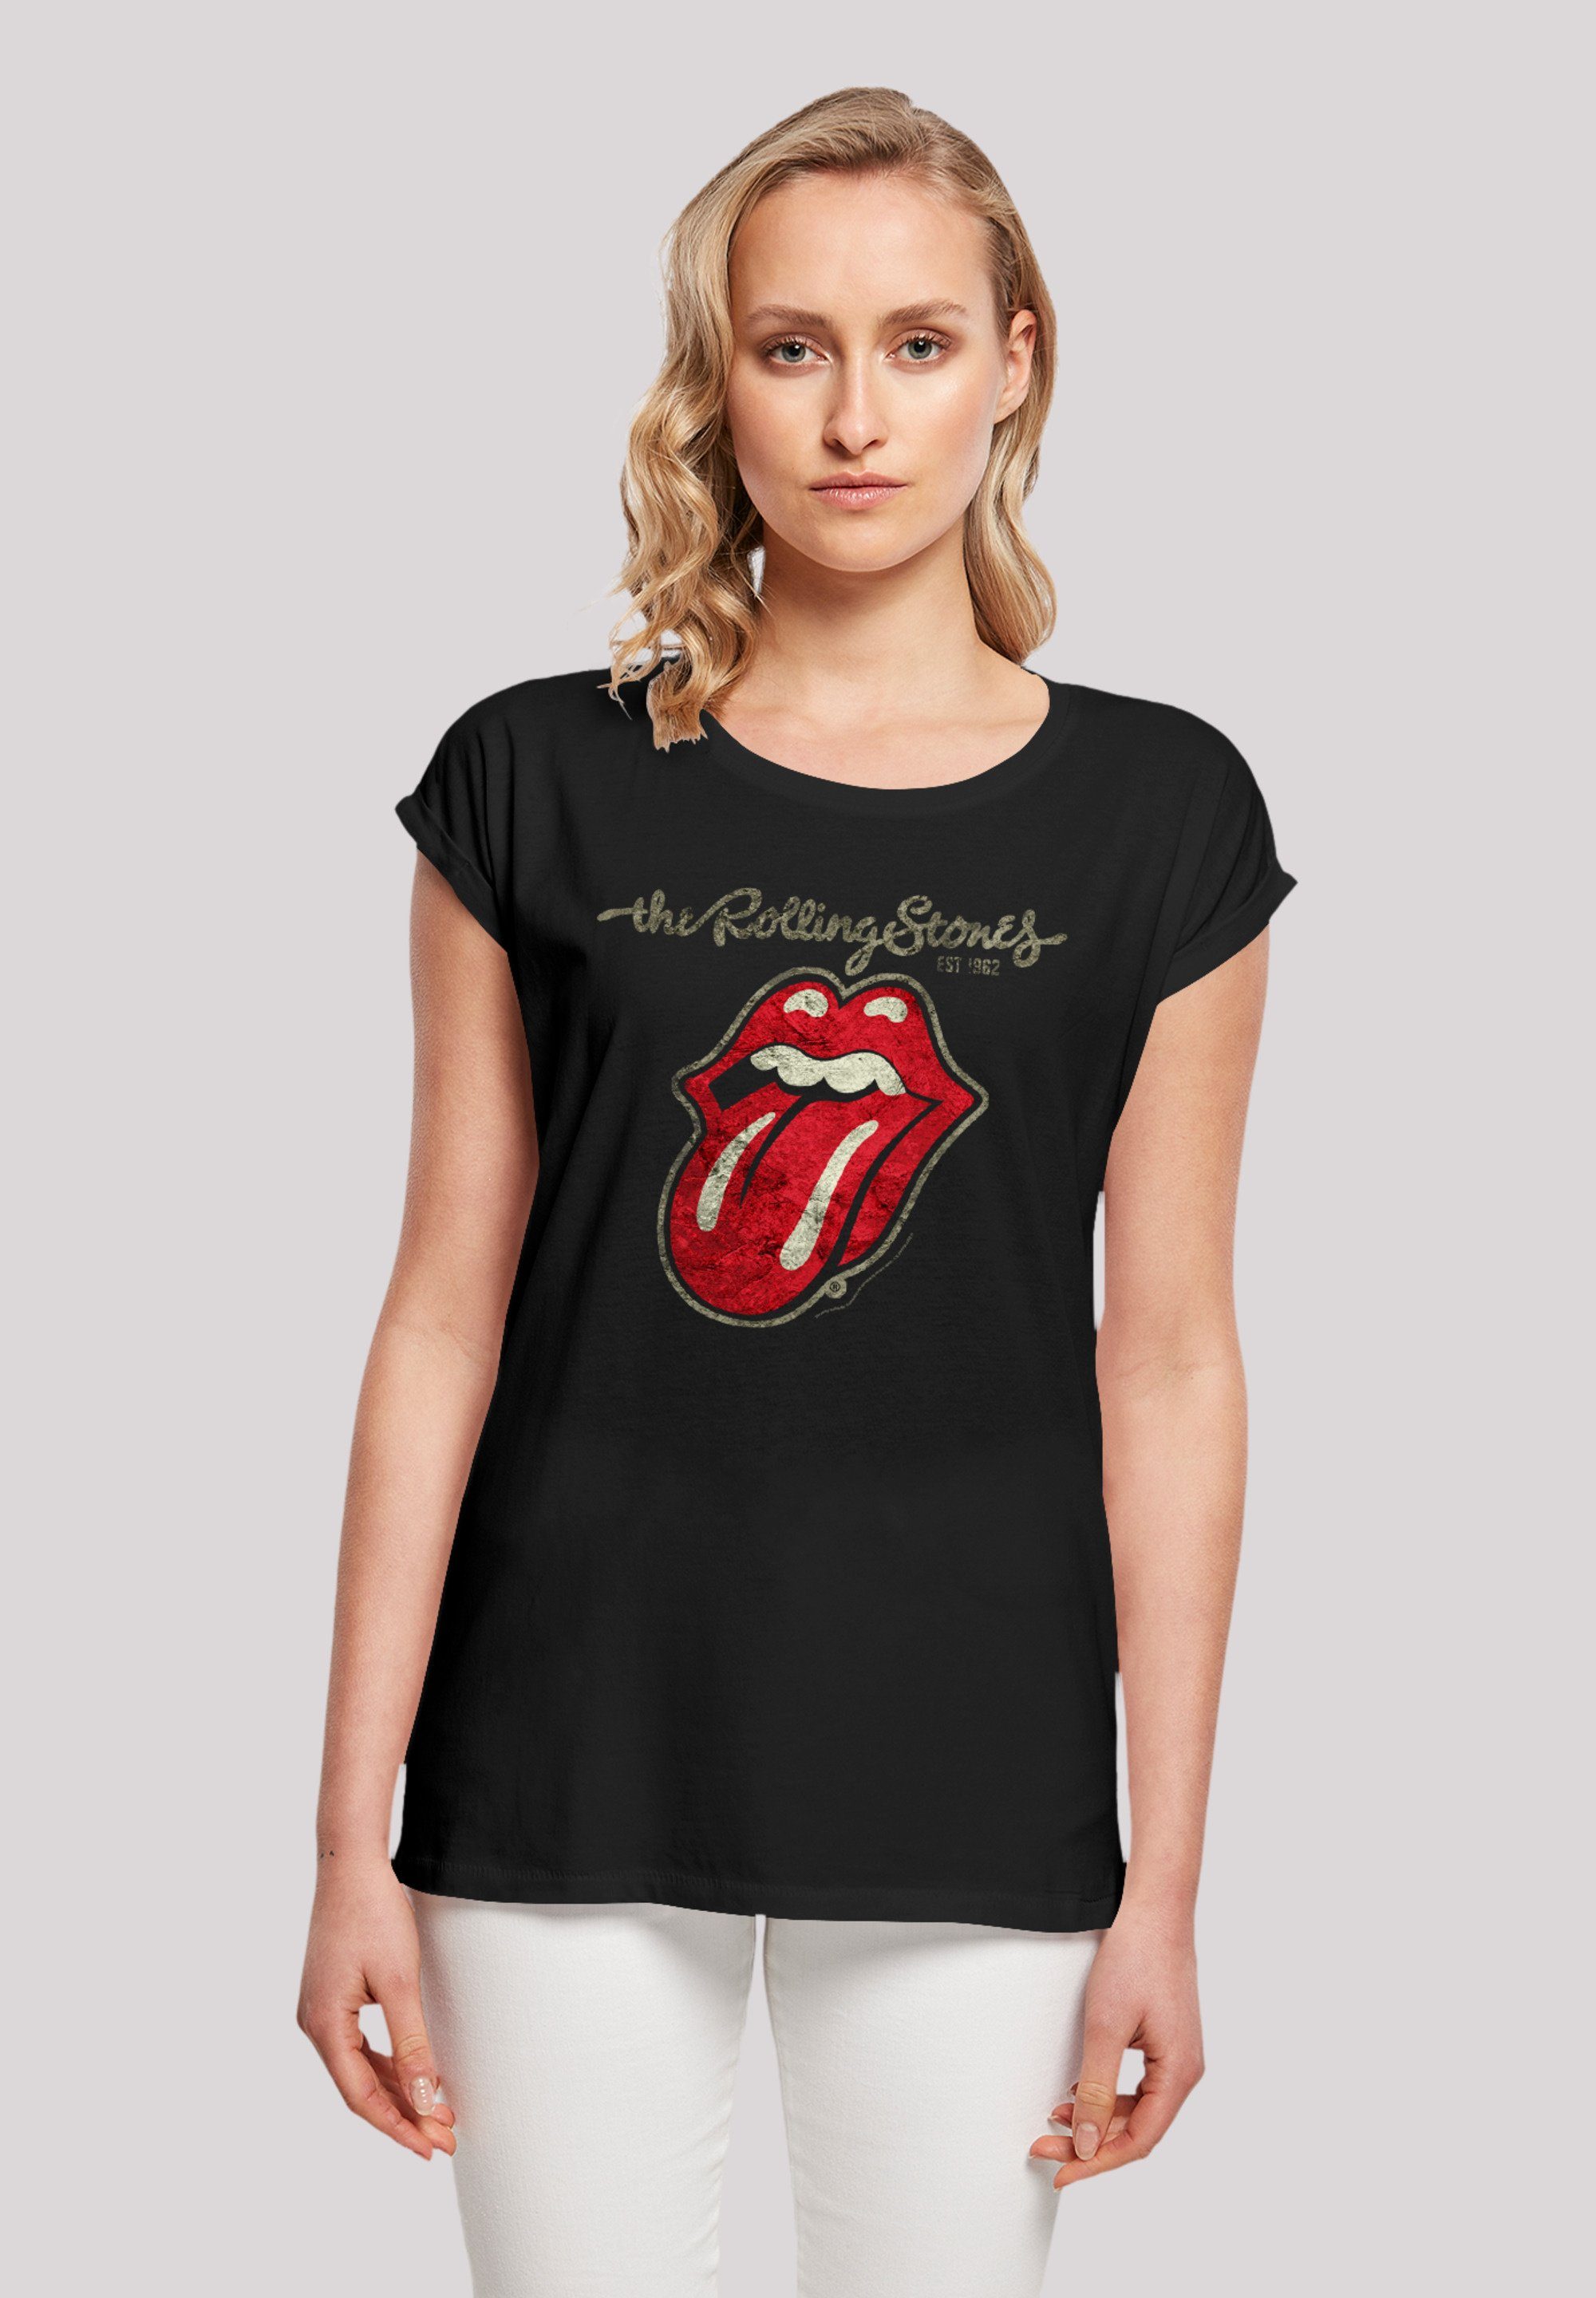 F4NT4STIC T-Shirt The Rolling Stones Plastered Tongue Washed Premium  Qualität, Offiziell lizenziertes The Rolling Stones T-Shirt | T-Shirts